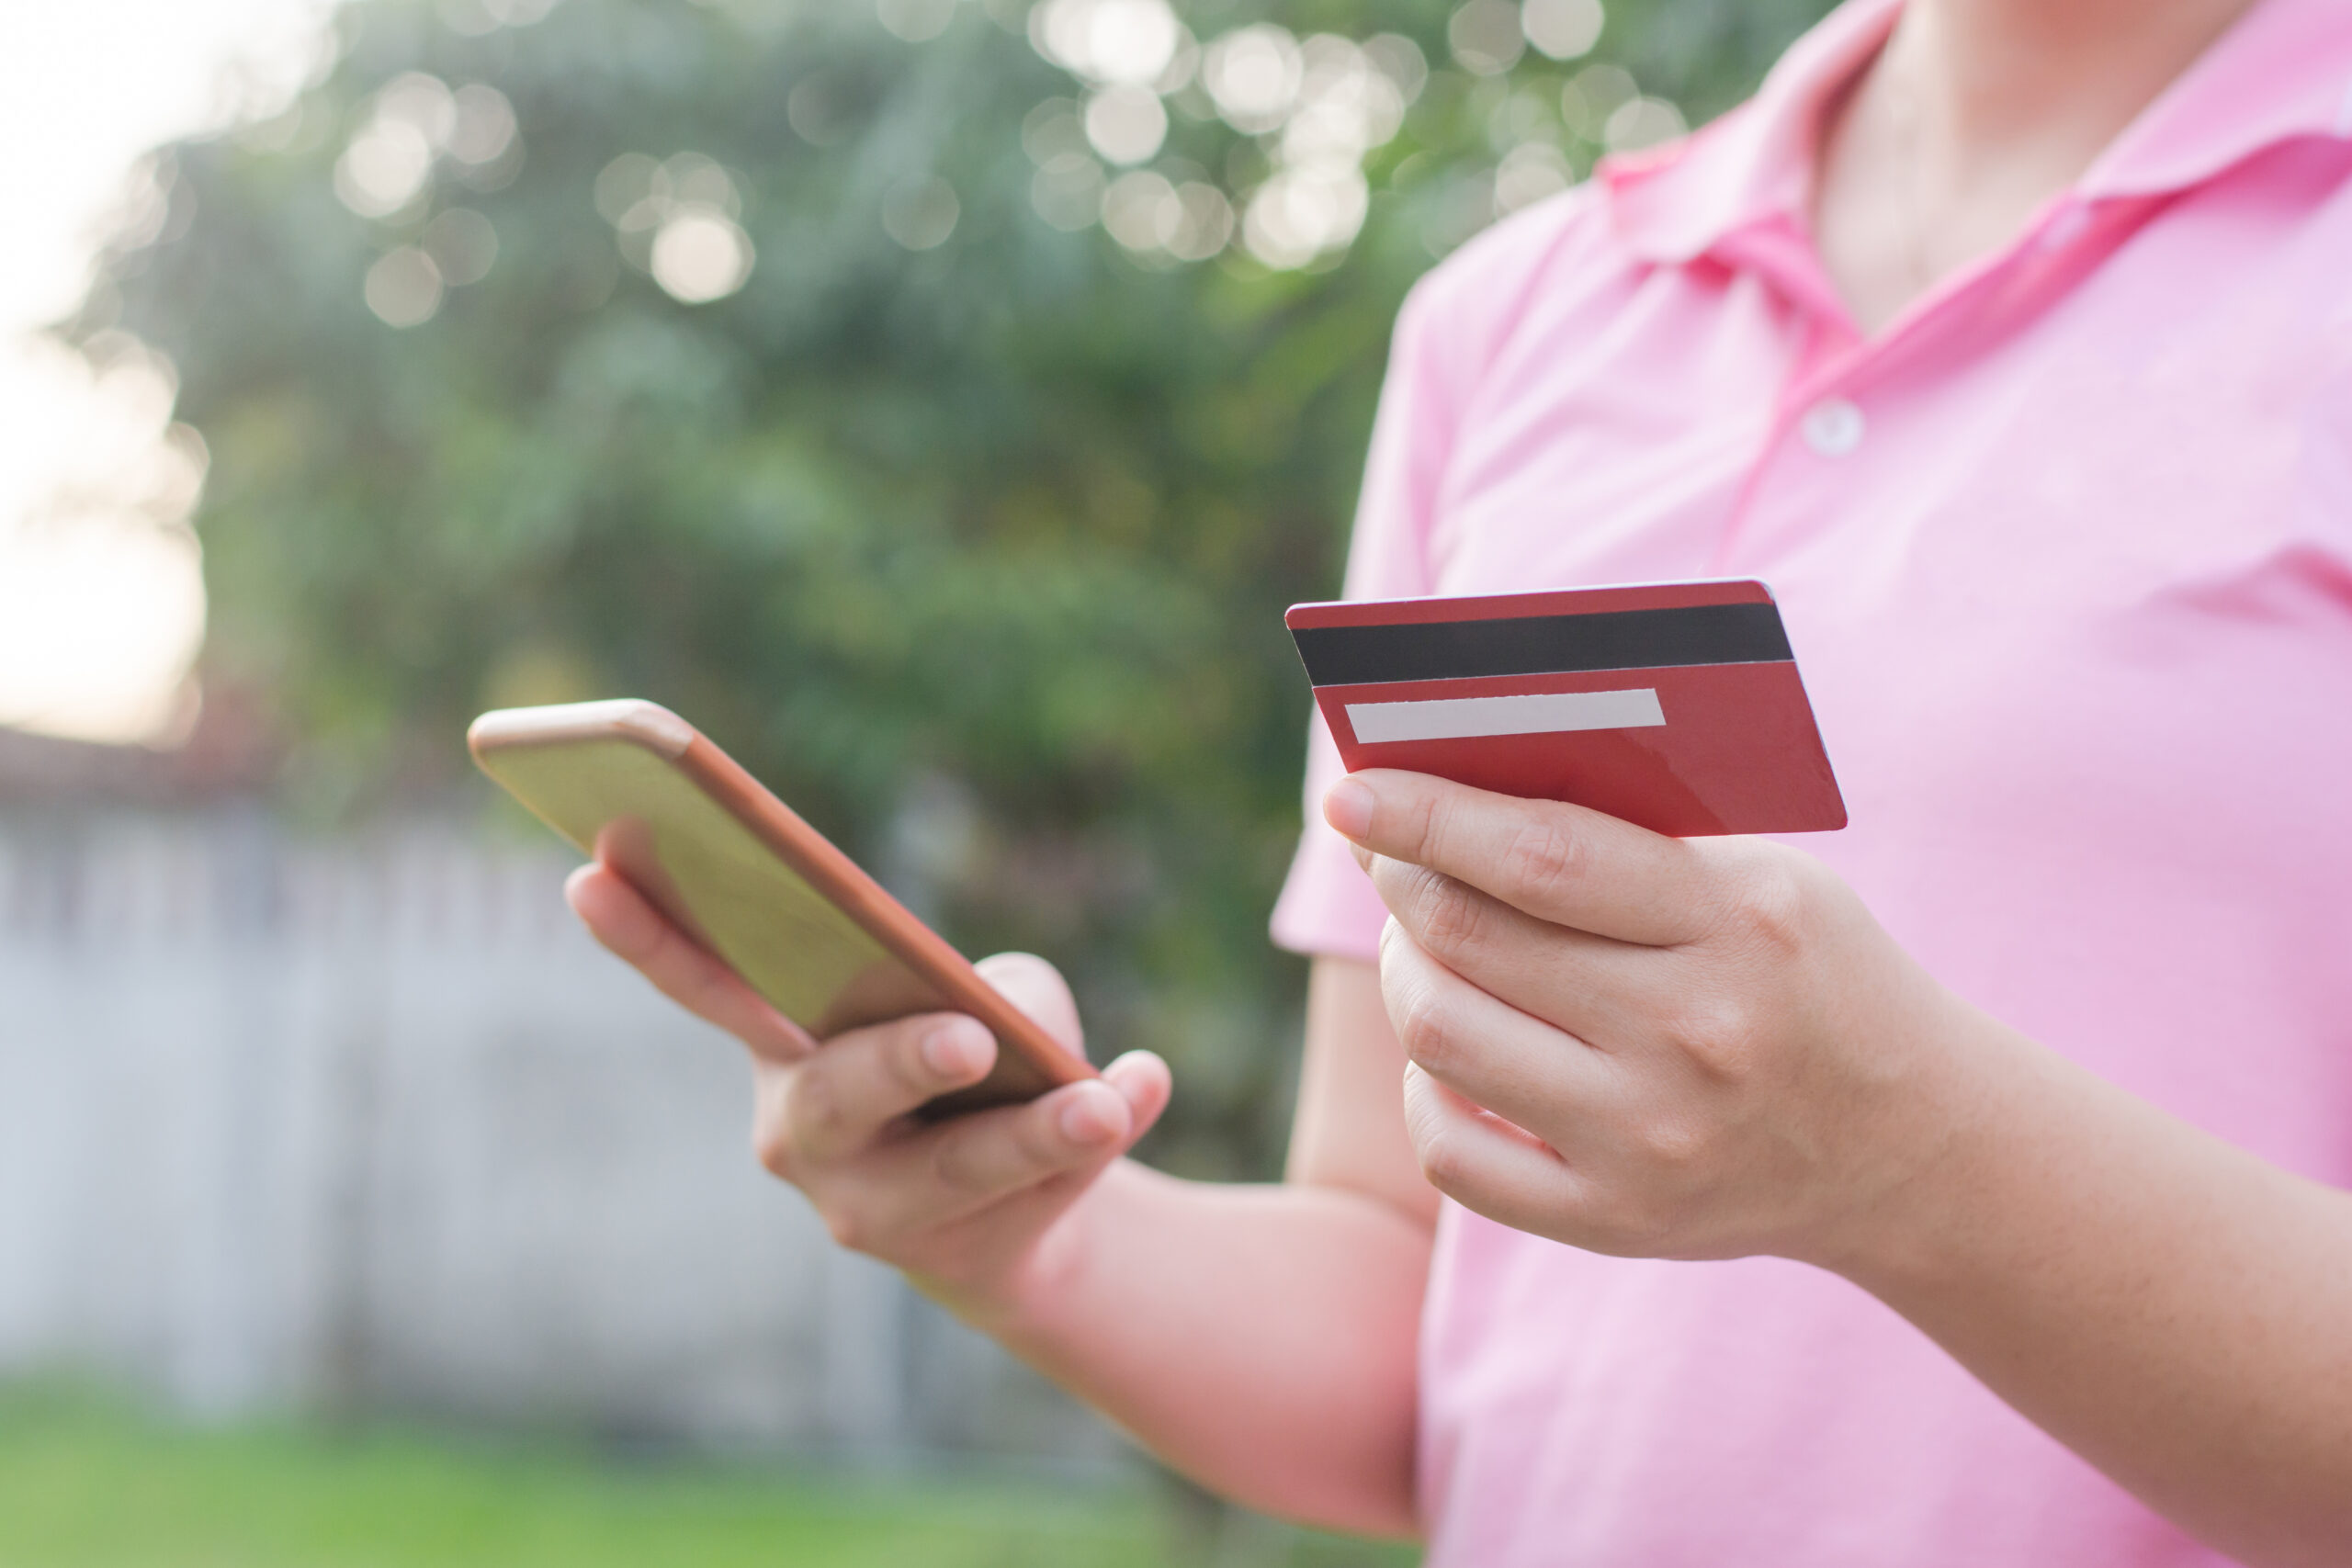 Mobile payment: a person in a pink shirt holding a smartphone in one hand and a credit card in the other, possibly making an unauthorized online transaction or managing finances.